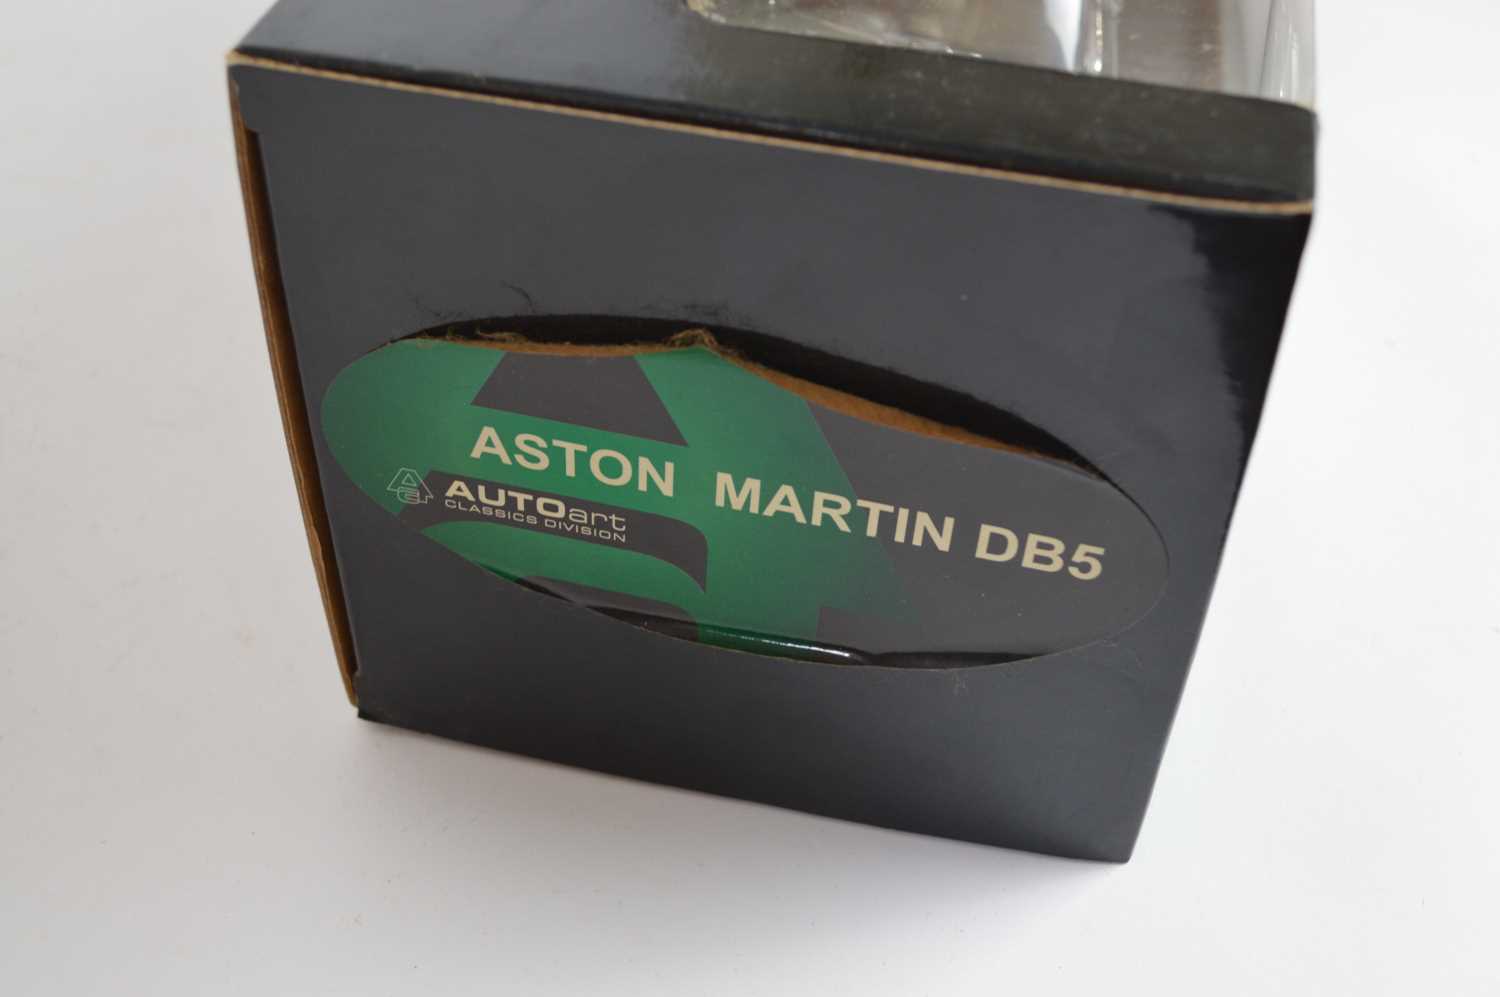 Auto Art Classics Division 1:18 scale model of an Aston Martin DB5 - Image 2 of 2